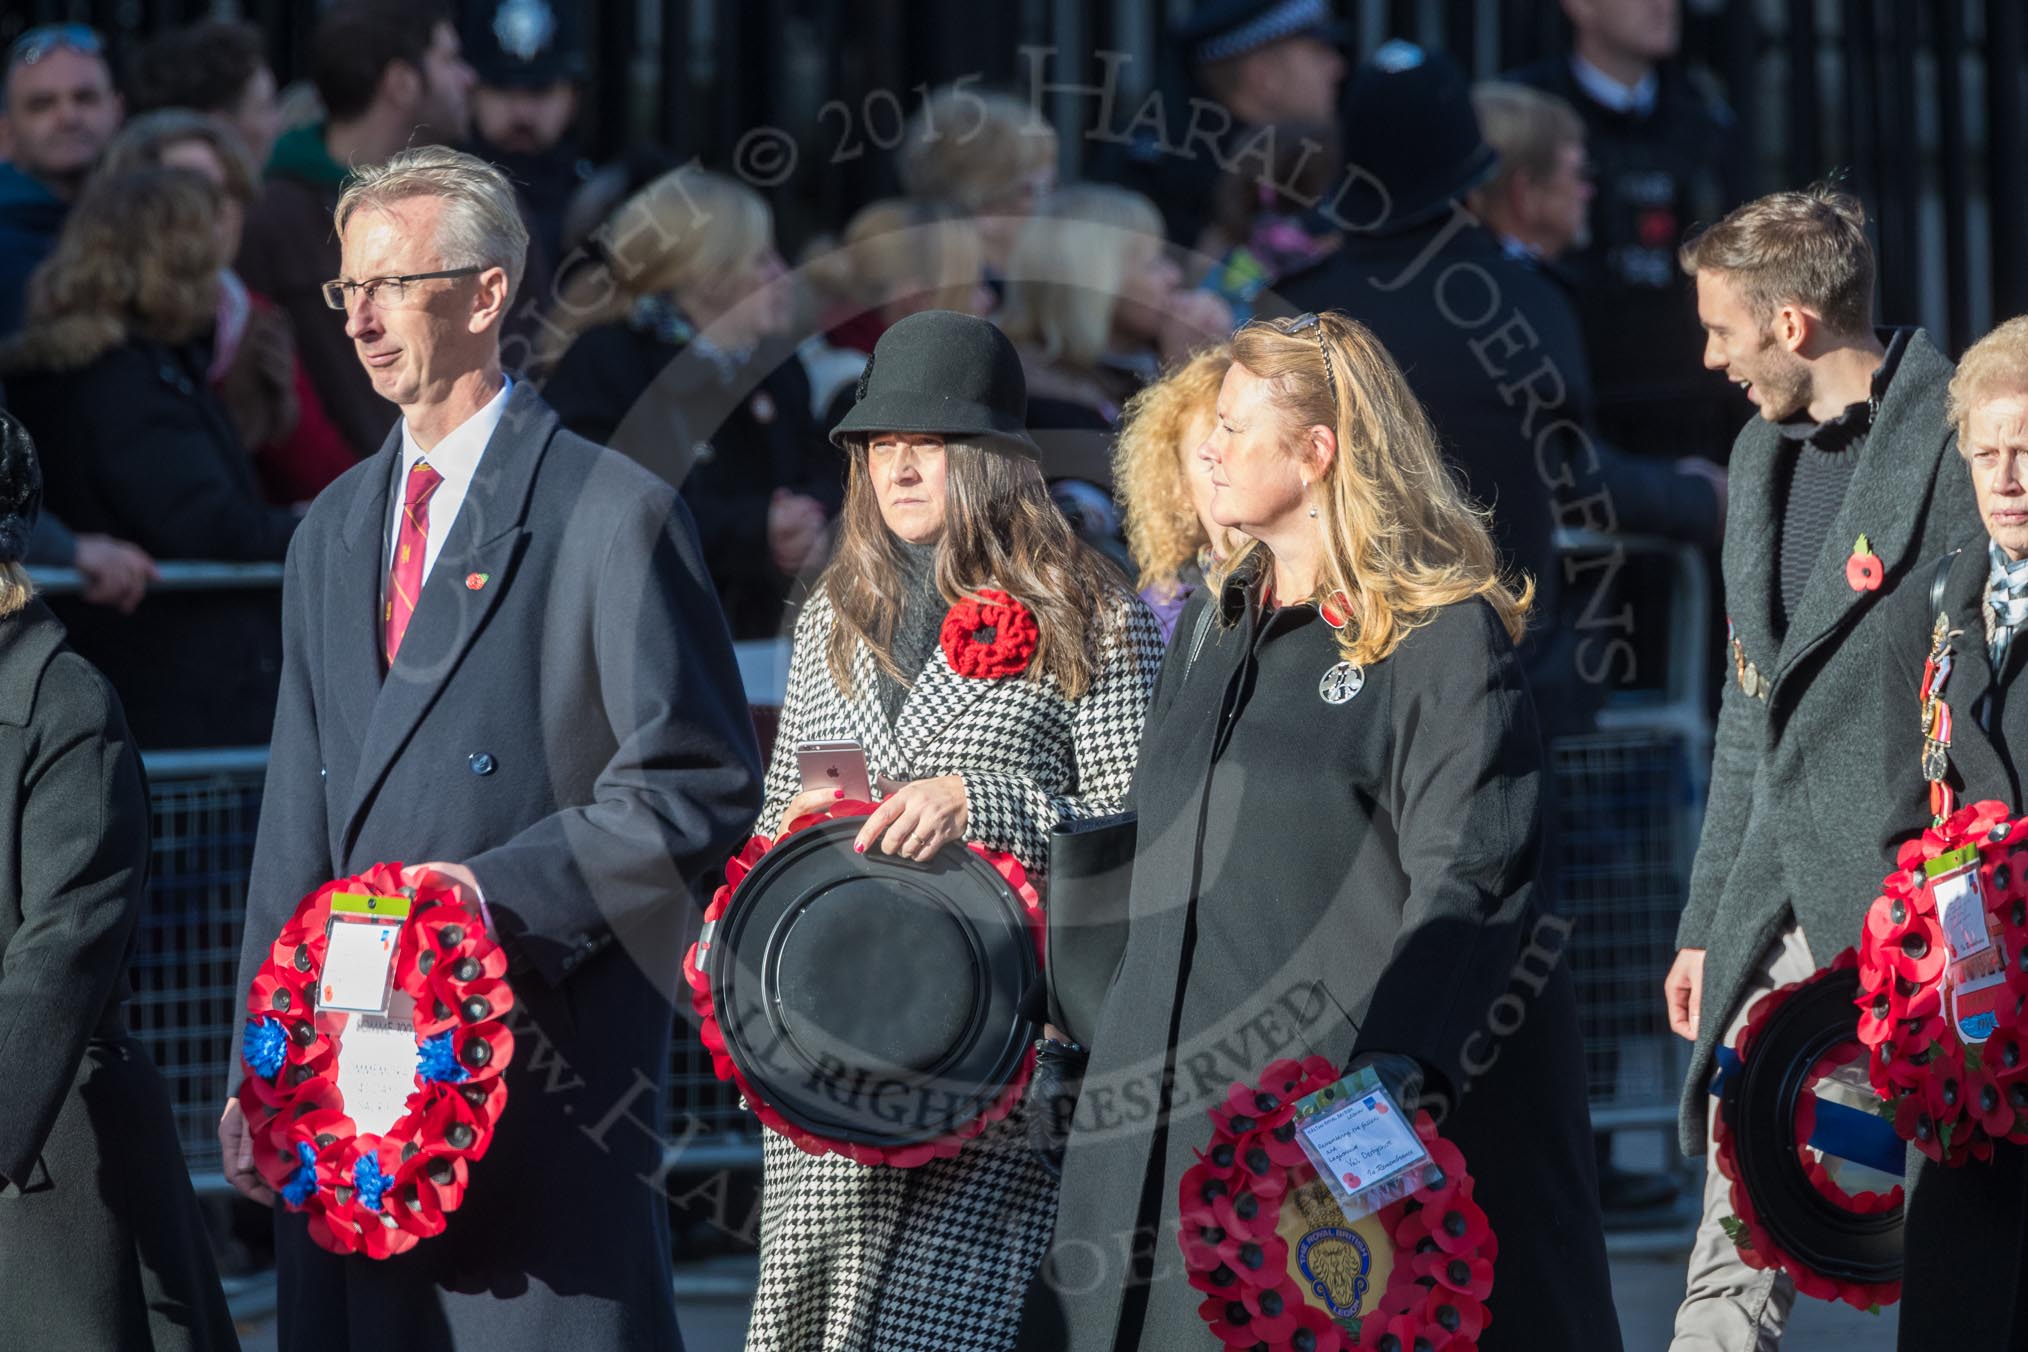 March Past, Remembrance Sunday at the Cenotaph 2016: M22 The Royal British Legion - Civilians.
Cenotaph, Whitehall, London SW1,
London,
Greater London,
United Kingdom,
on 13 November 2016 at 13:16, image #2681